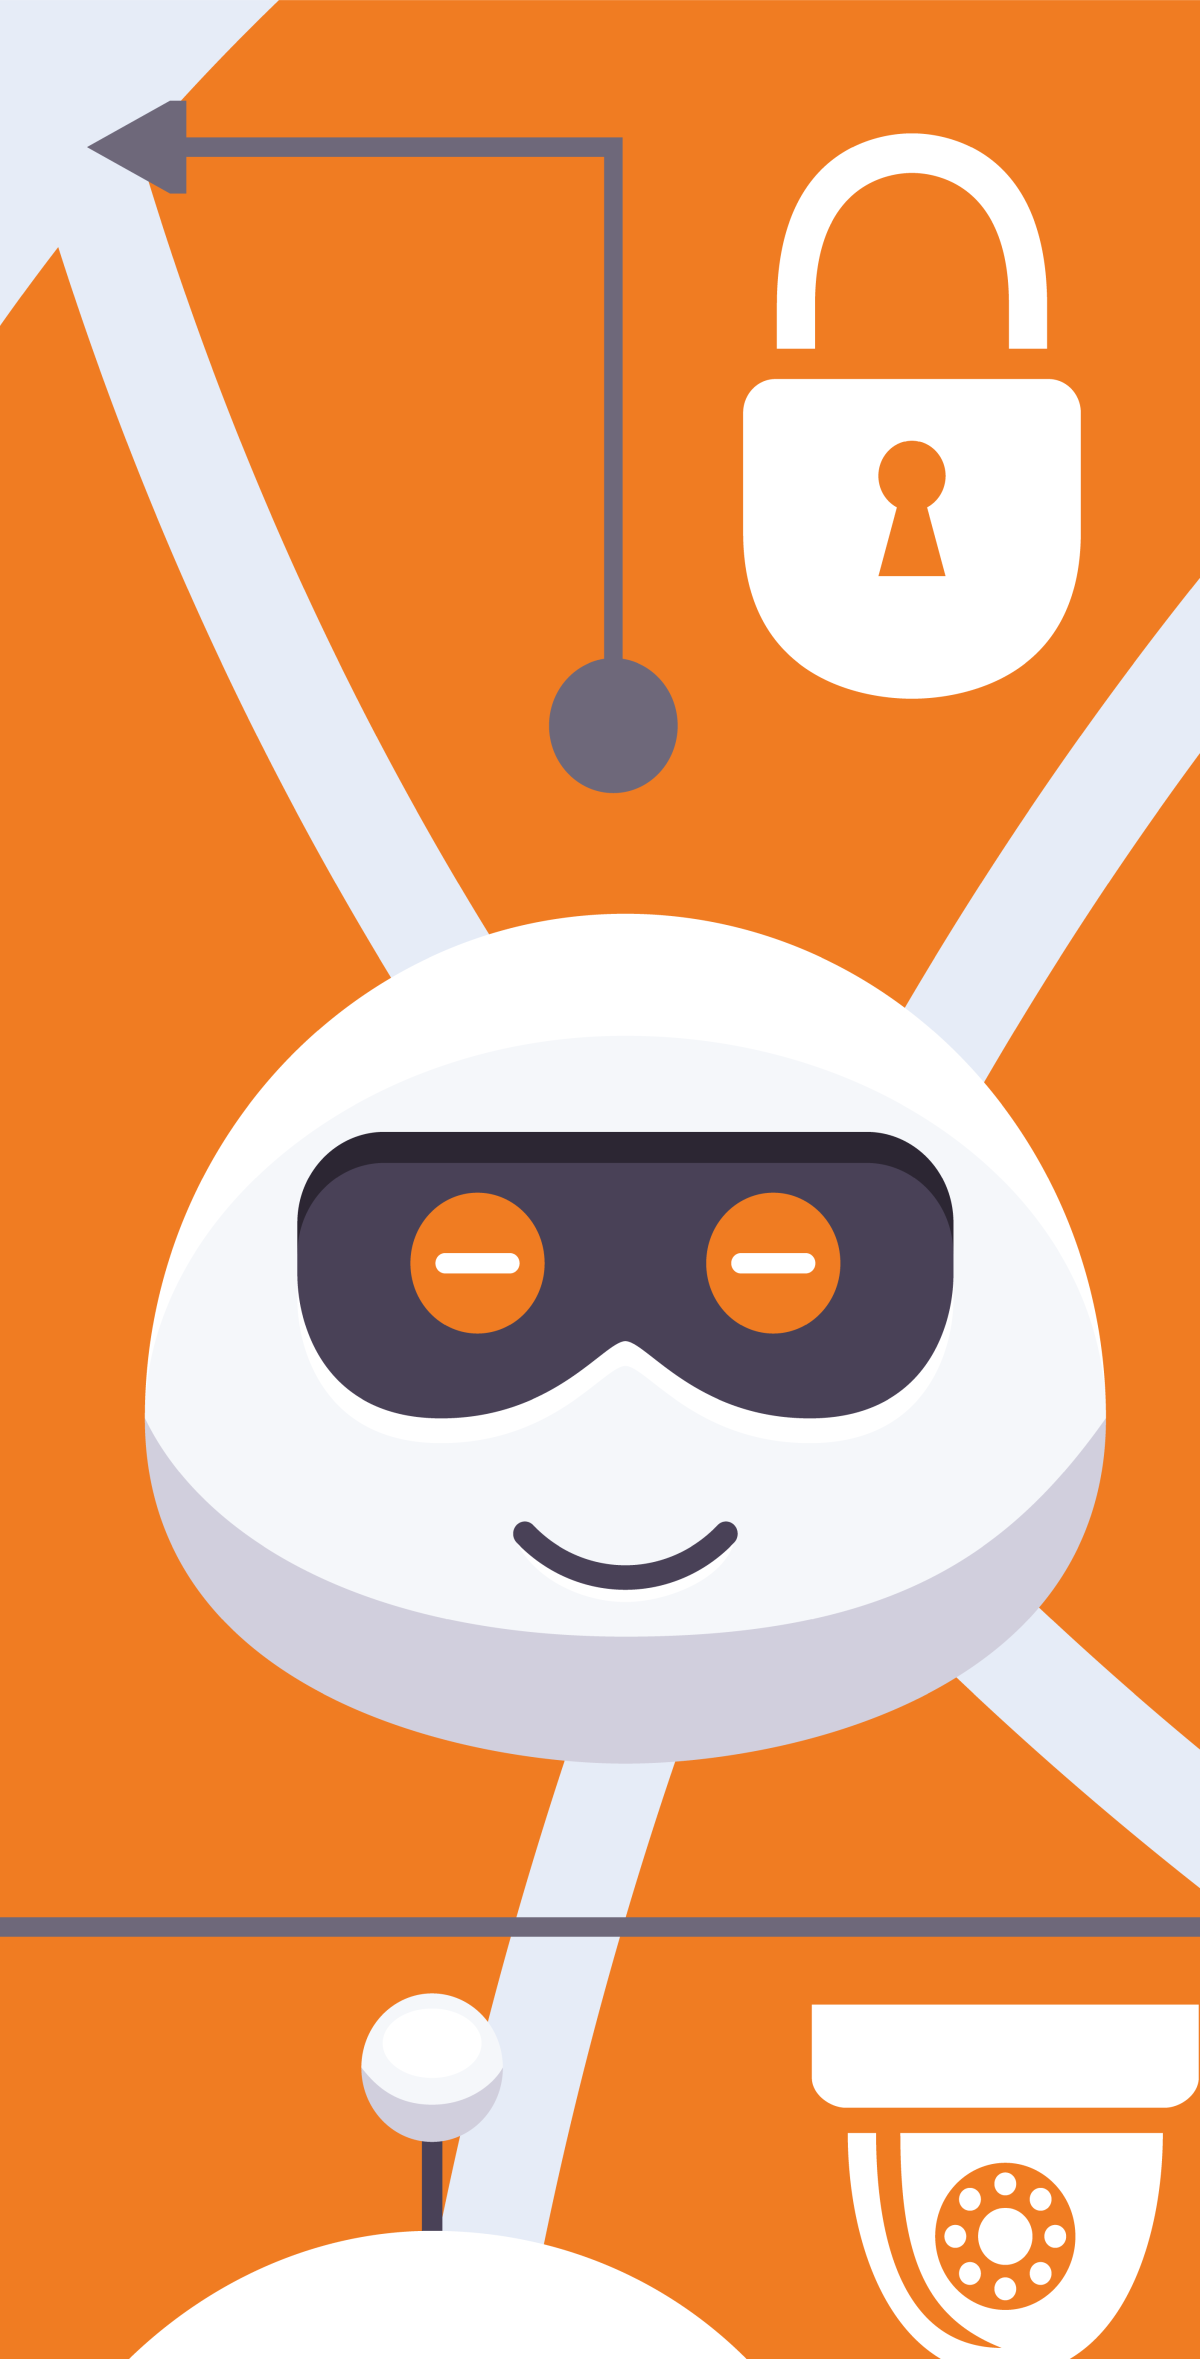 Graphic of a chat bot against an orange background.